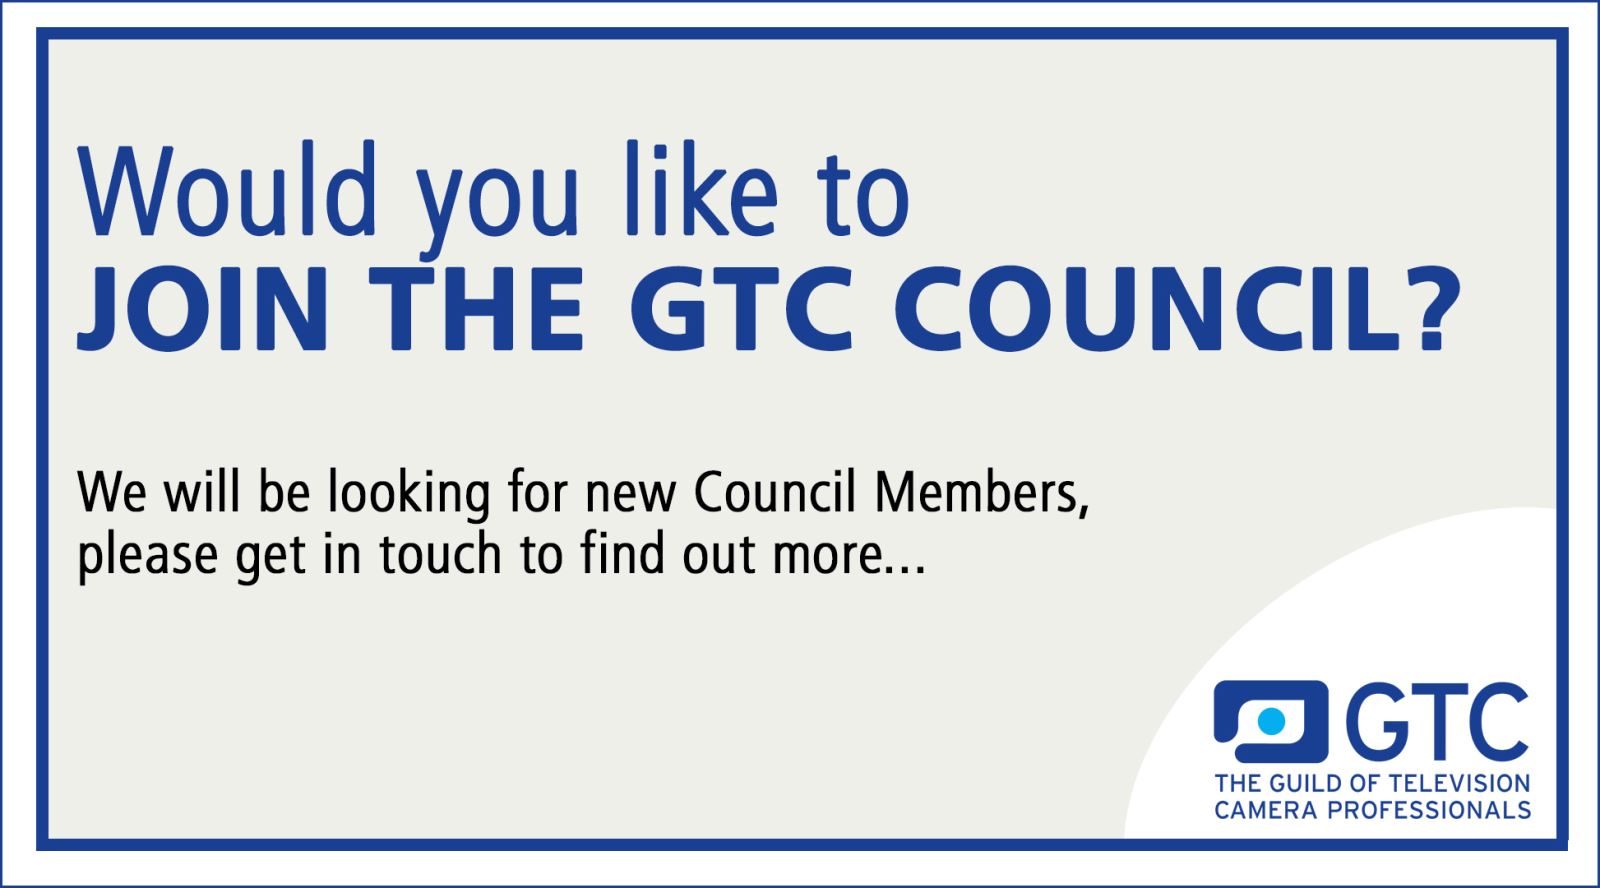 Joing the GTC Council